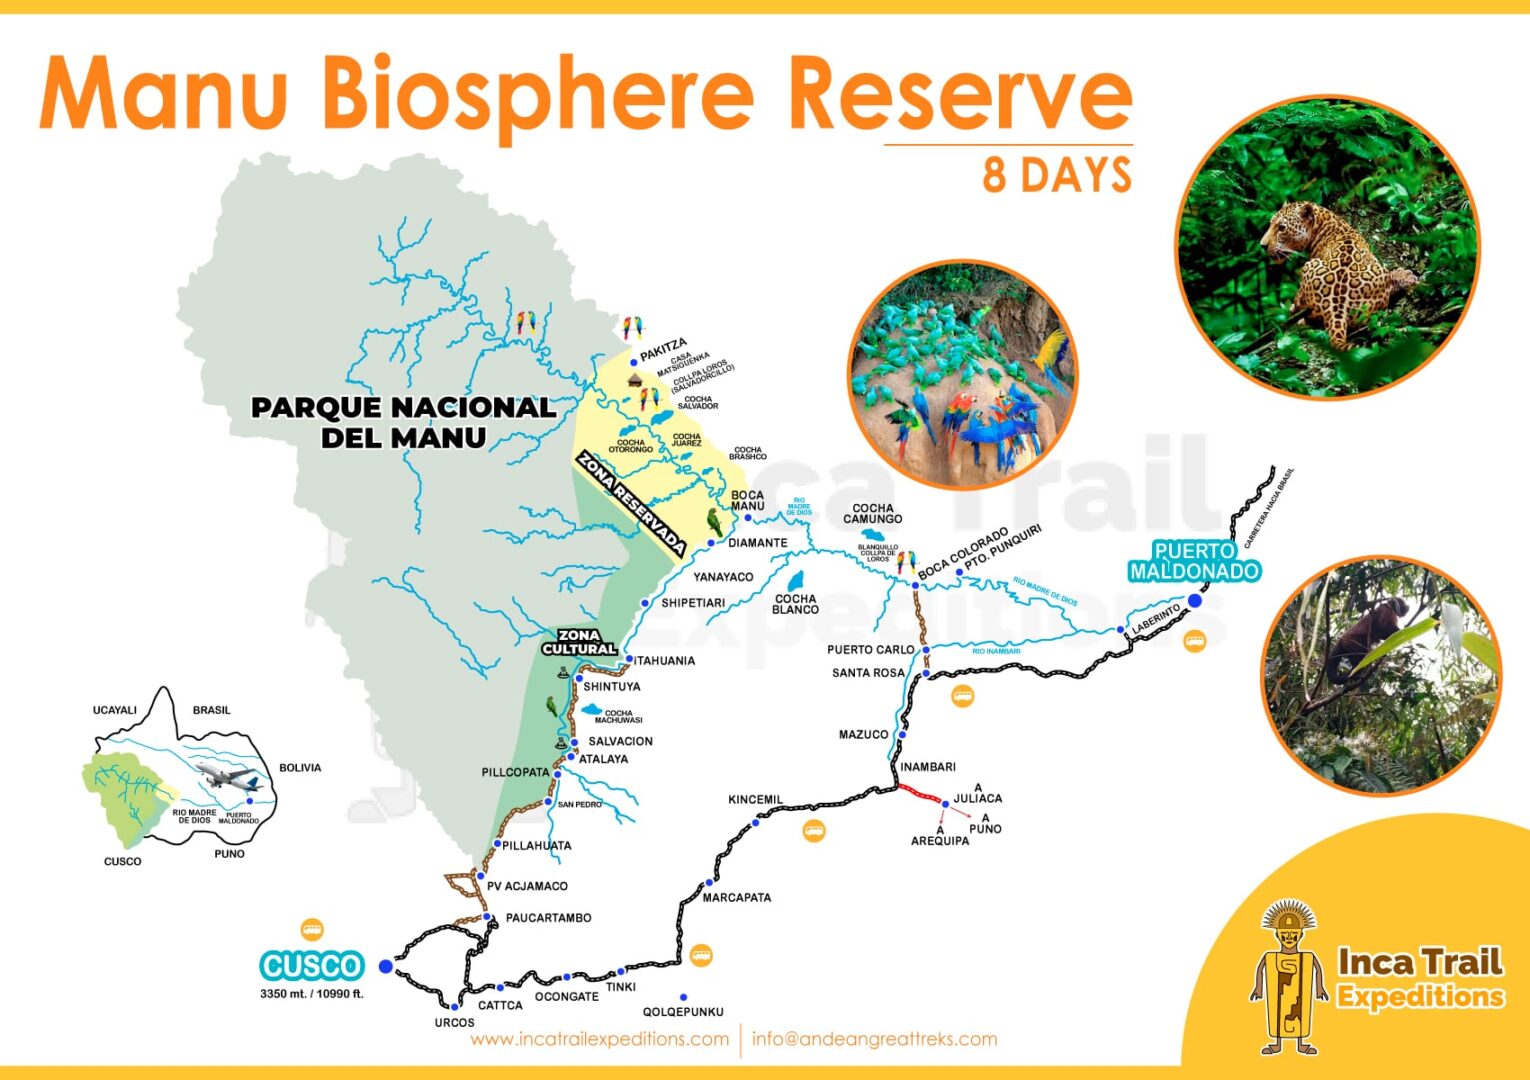 MANU-BOISPHERE-RESERVE-8-DAYS-BY-INCA-TRAIL-EXPEDITIONS